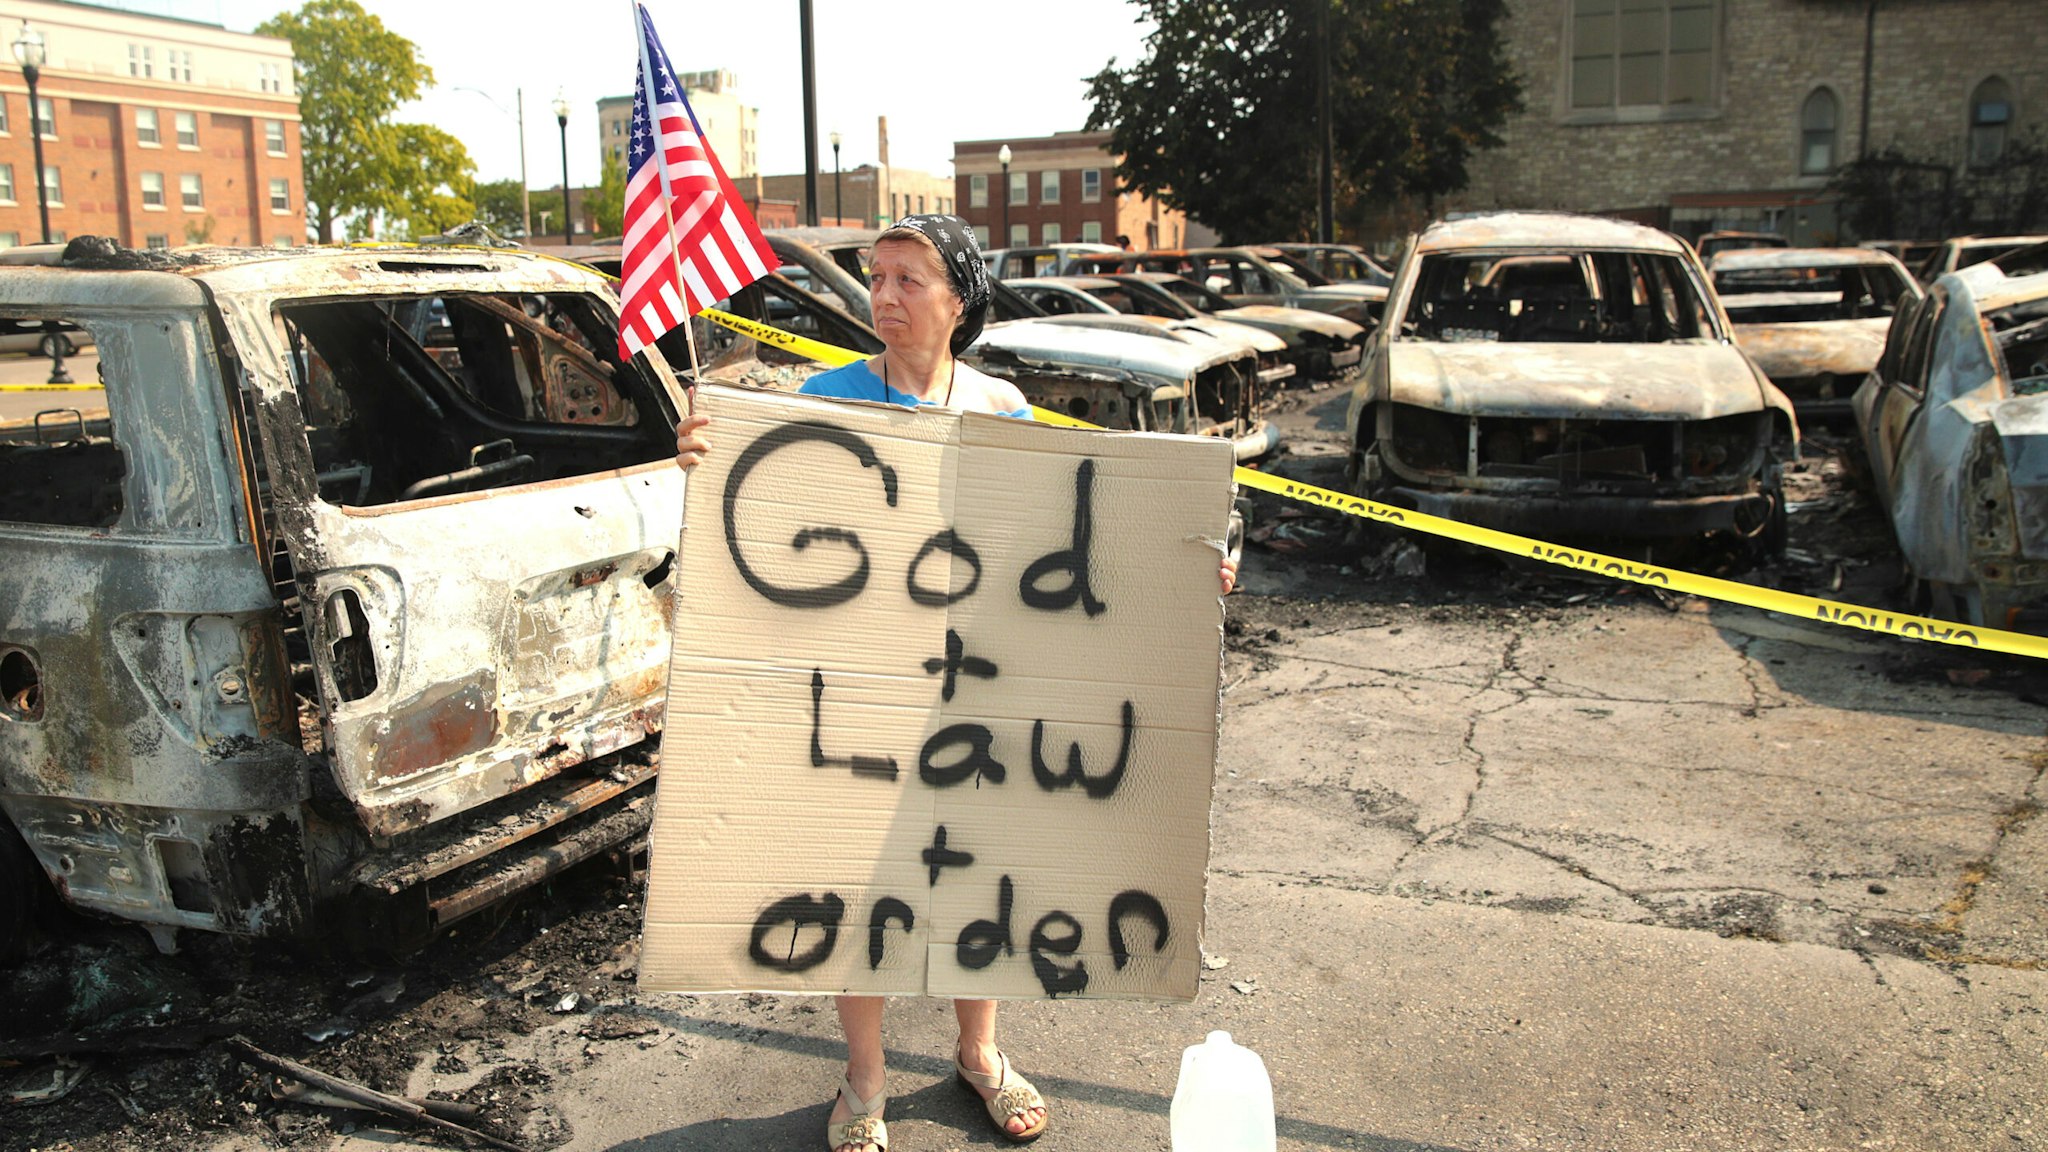 KENOSHA, WISCONSIN - AUGUST 24: A women holds a sign while standing in a used car lot with burned out cars after a night of unrest, on August 24, 2020 in Kenosha, Wisconsin. The unrest stemmed from an incident in which police shot a Black man multiple times in the back as he entered the driver's side door of a vehicle.